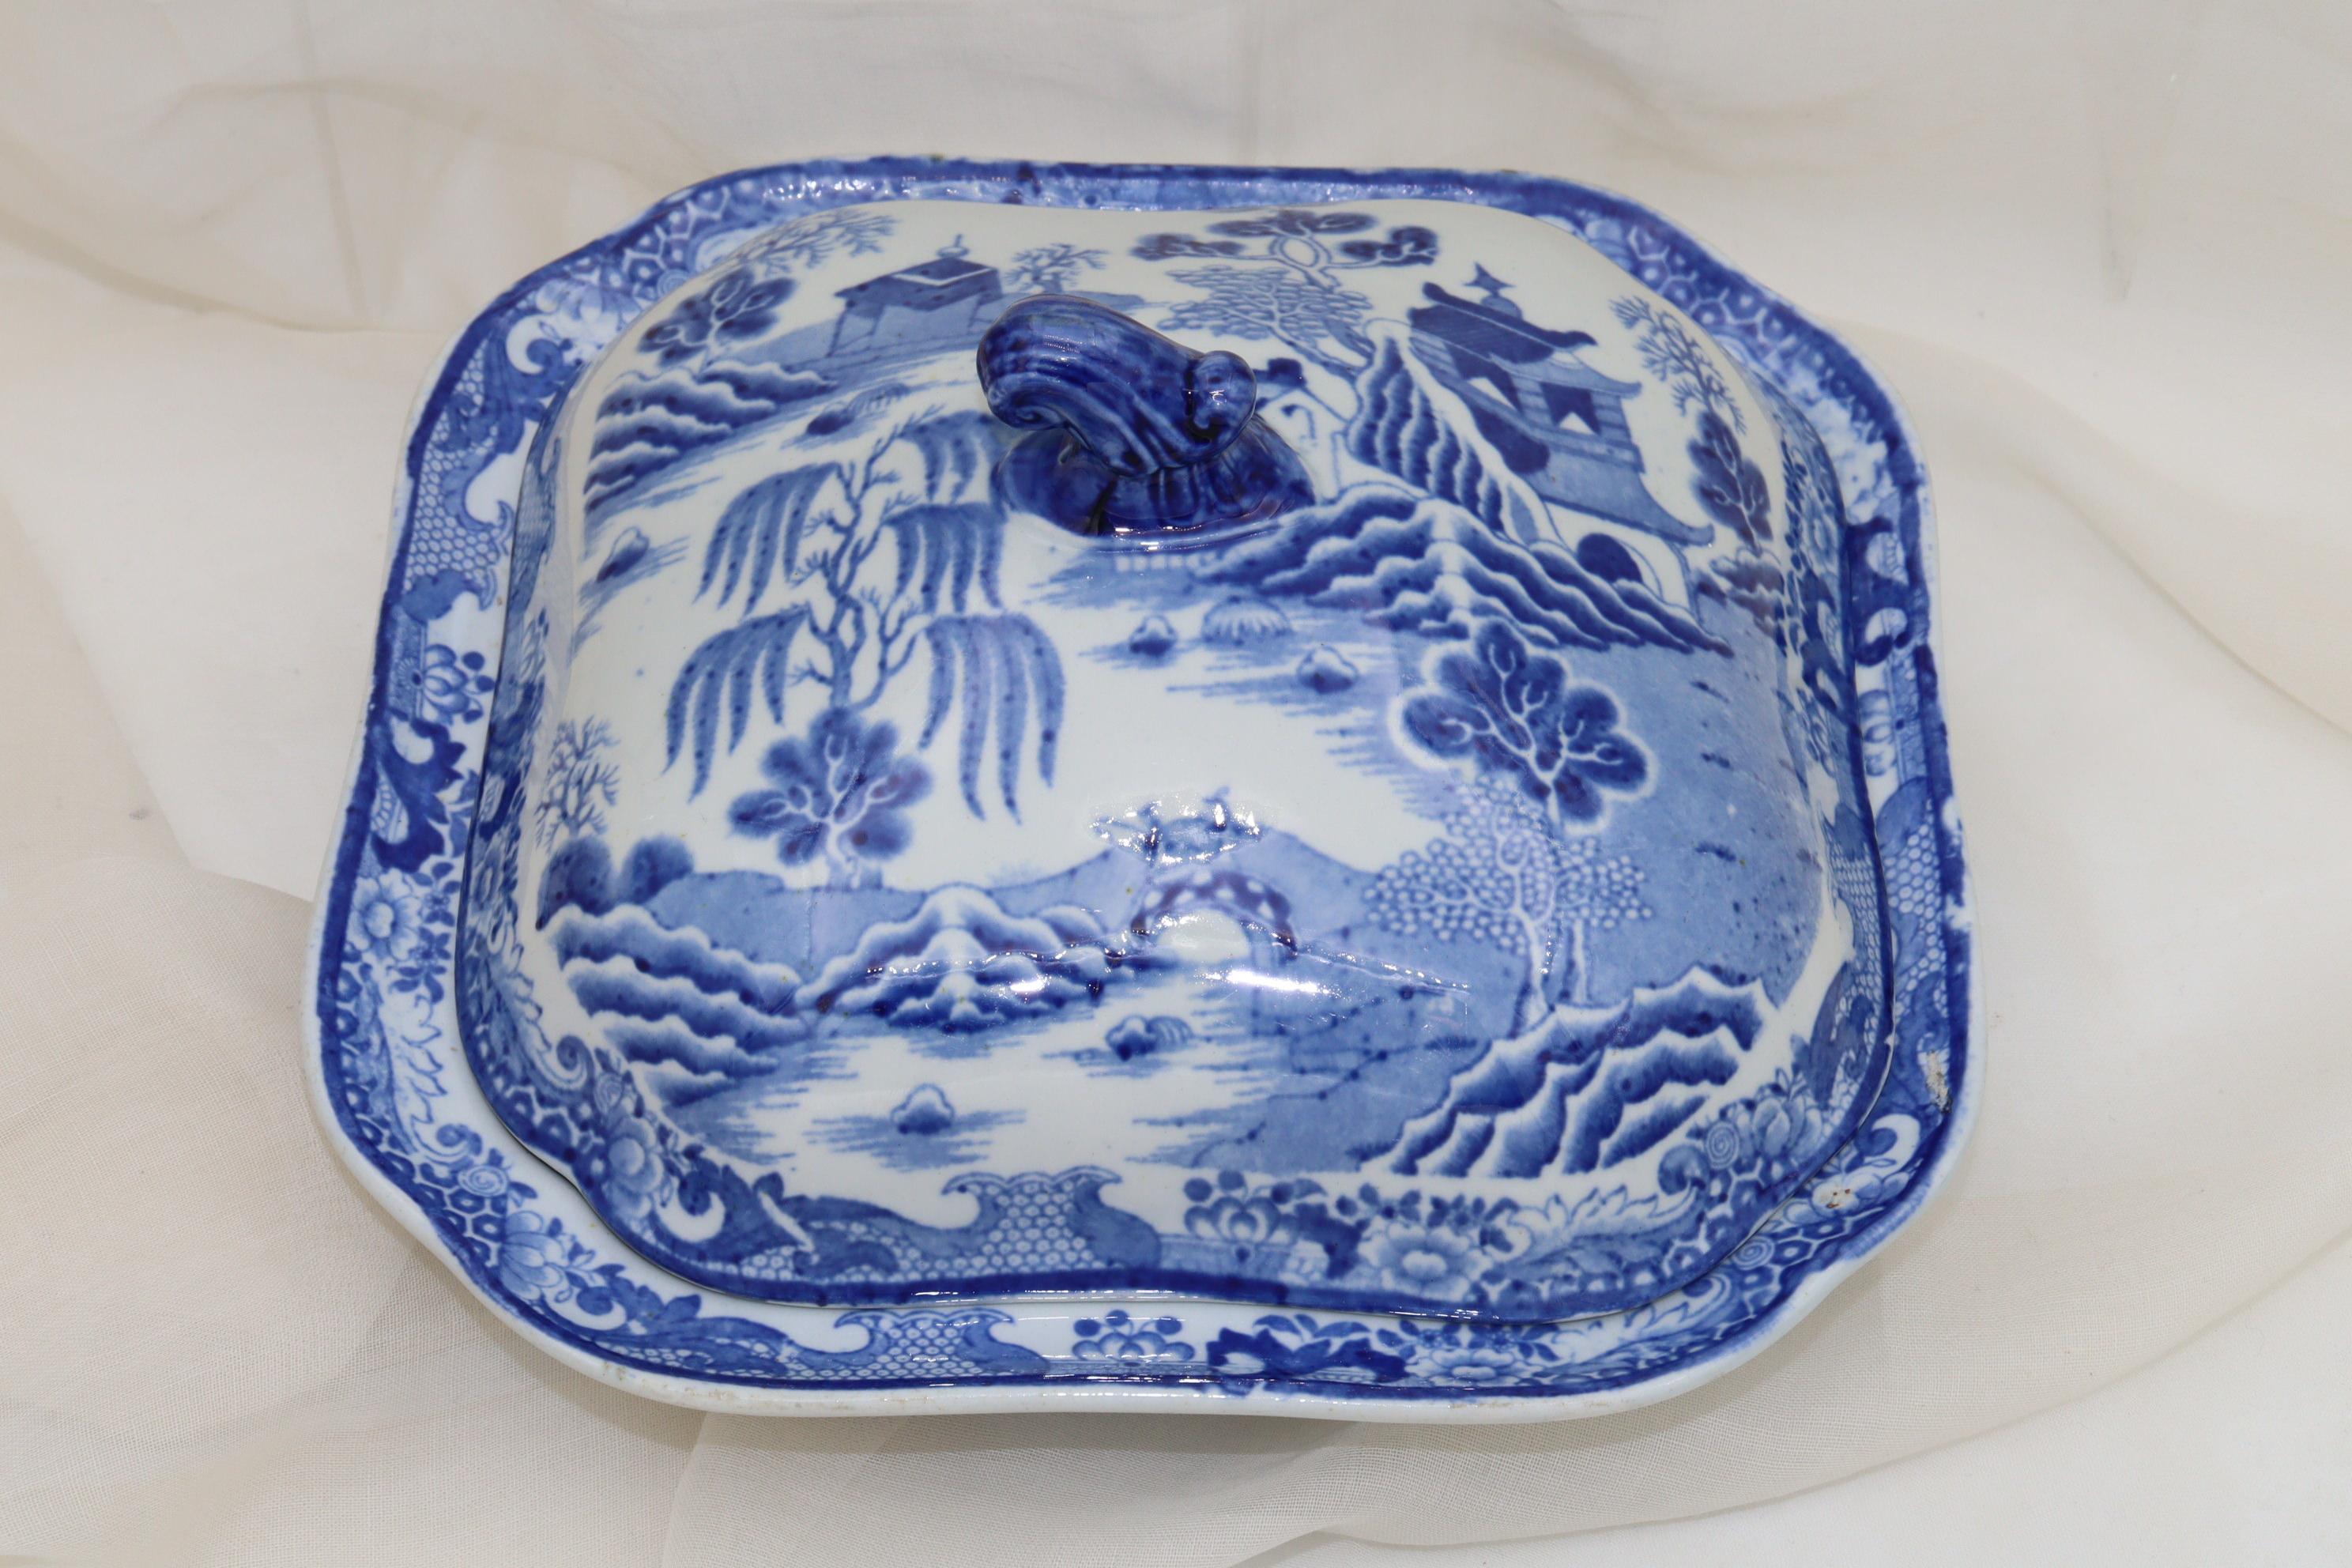 This lovely Mason's Ironstone blue and white lidded vegetable tureen is decorated with the transfer pattern known as 